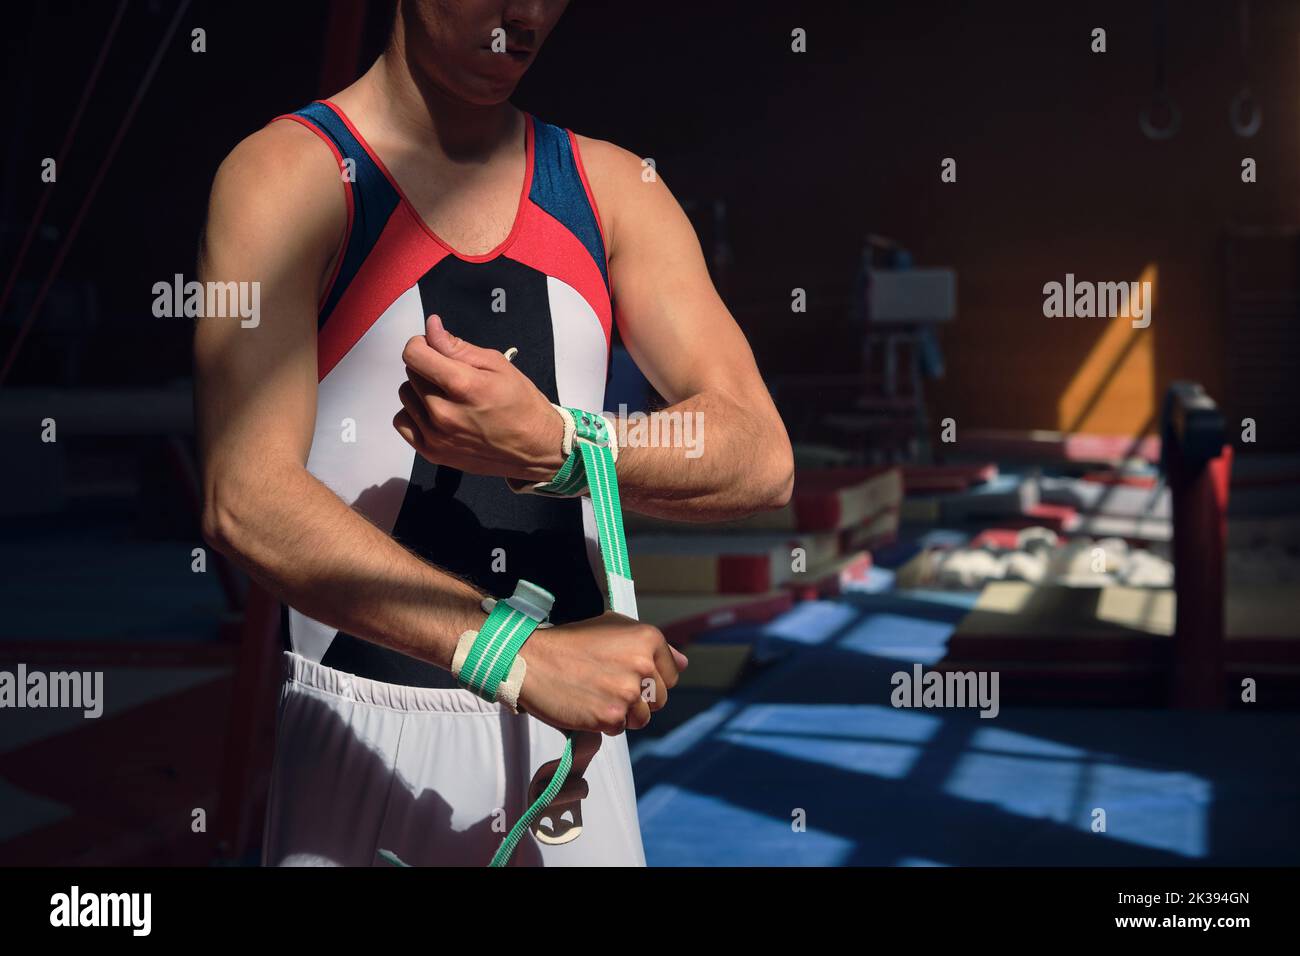 Unrecognisable person putting on wristbands to perform gymnastic exercises. Stock Photo